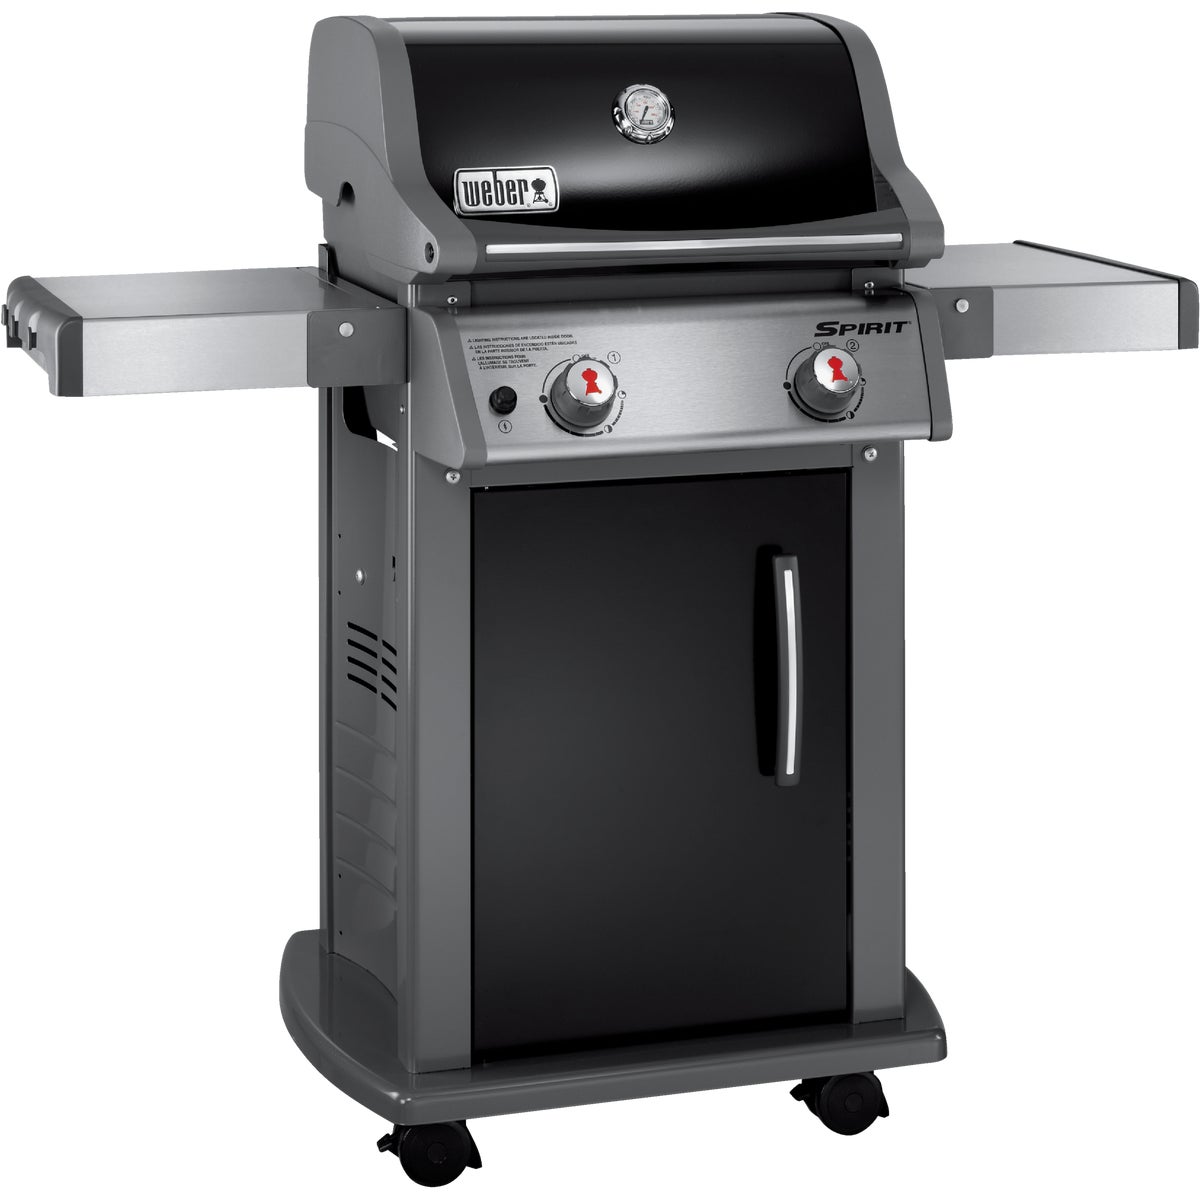 Item 814122, Durable LP gas grill. Features a primary cooking area of 360 Sq. In.